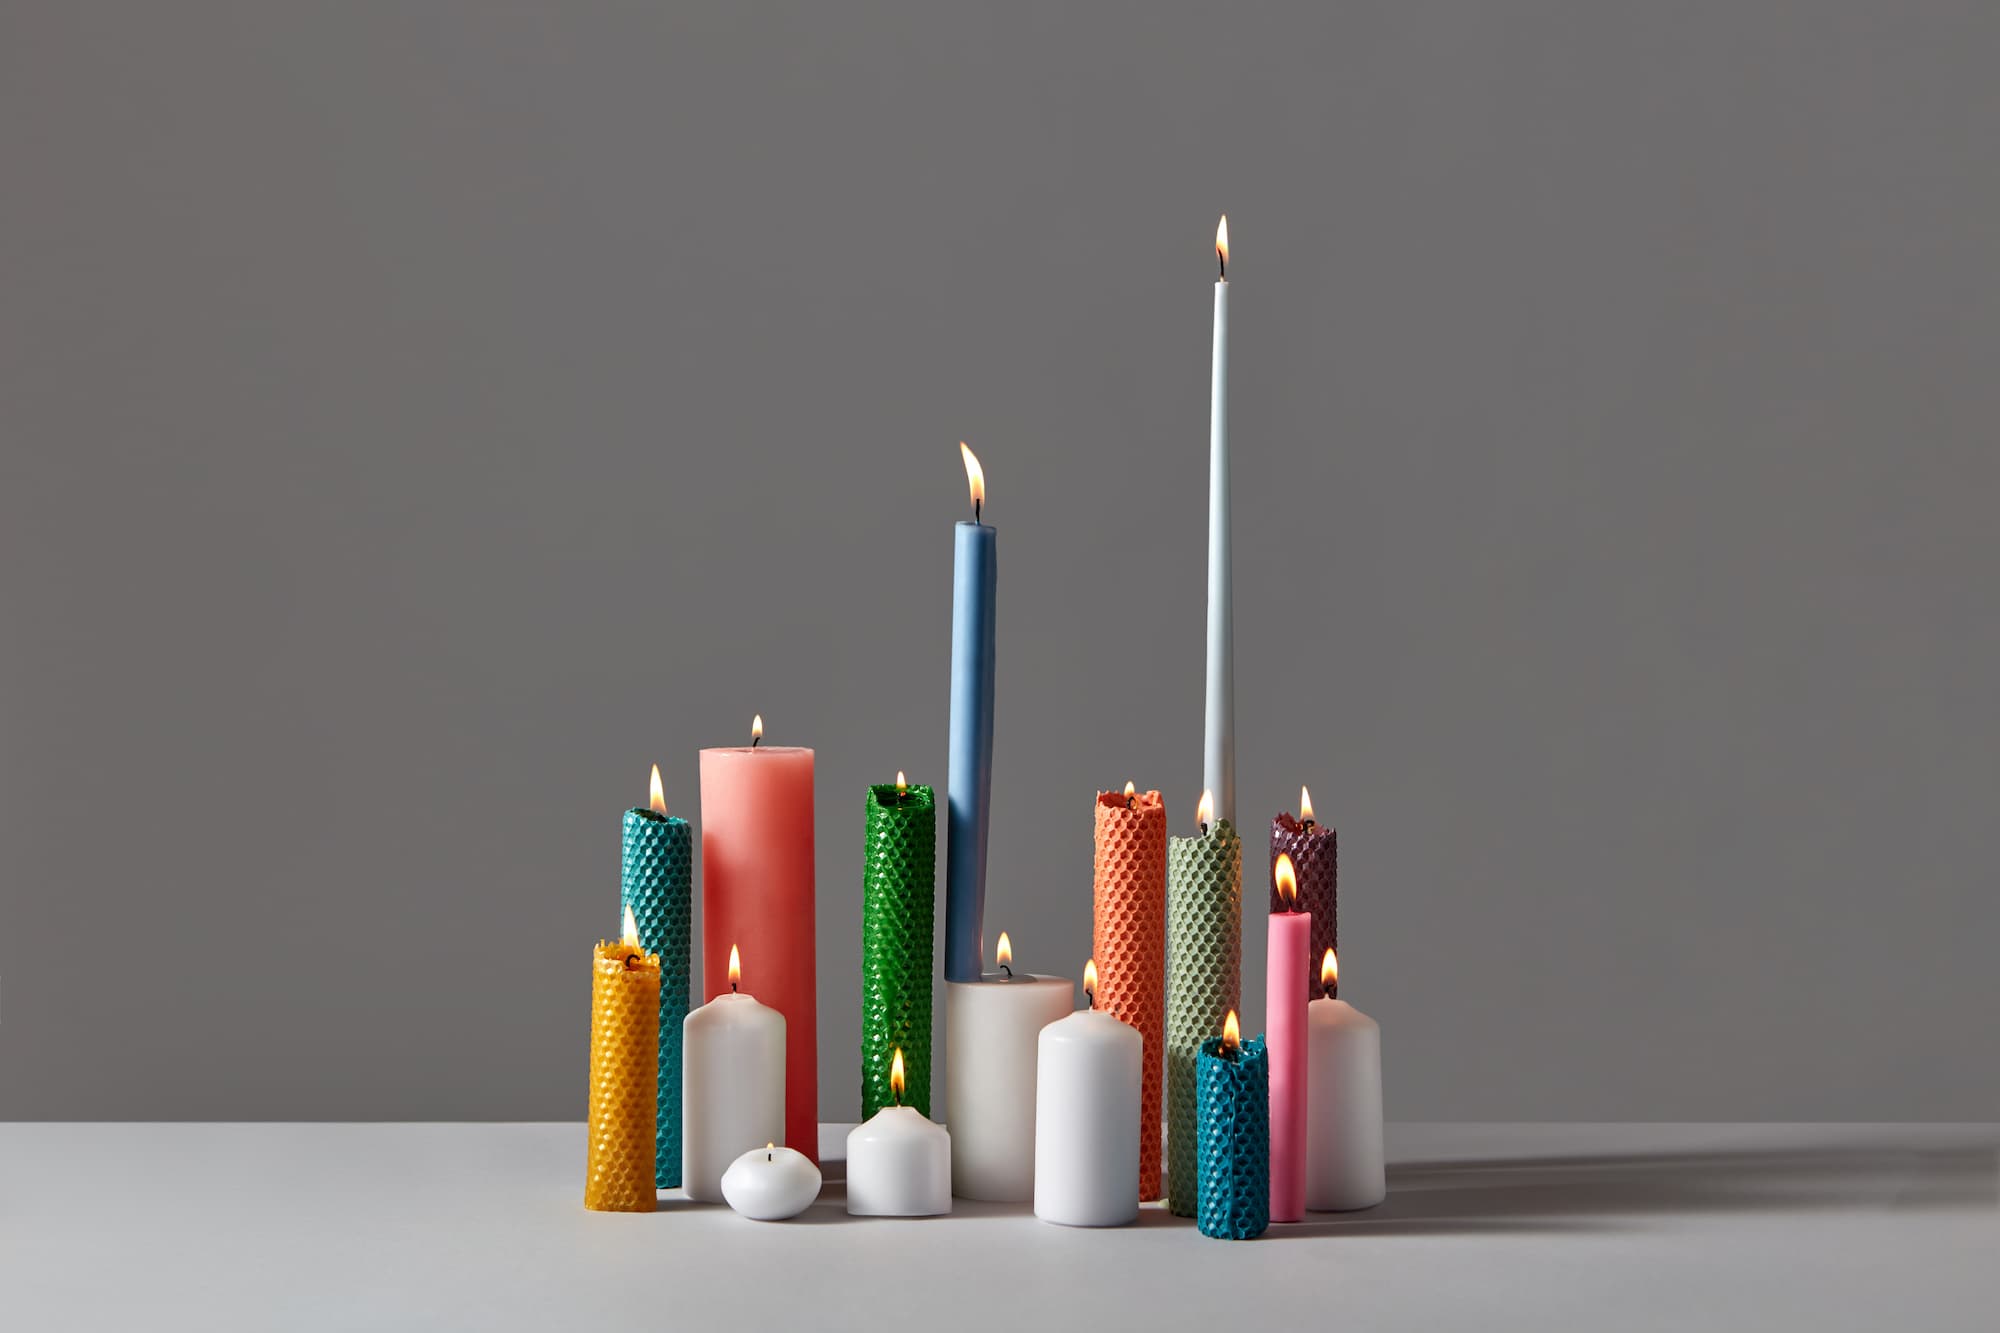 Handmade multi-colored beeswax candles in various shapes on gray background with space for text. Minimal adornment design for Easter or Christmas holiday.